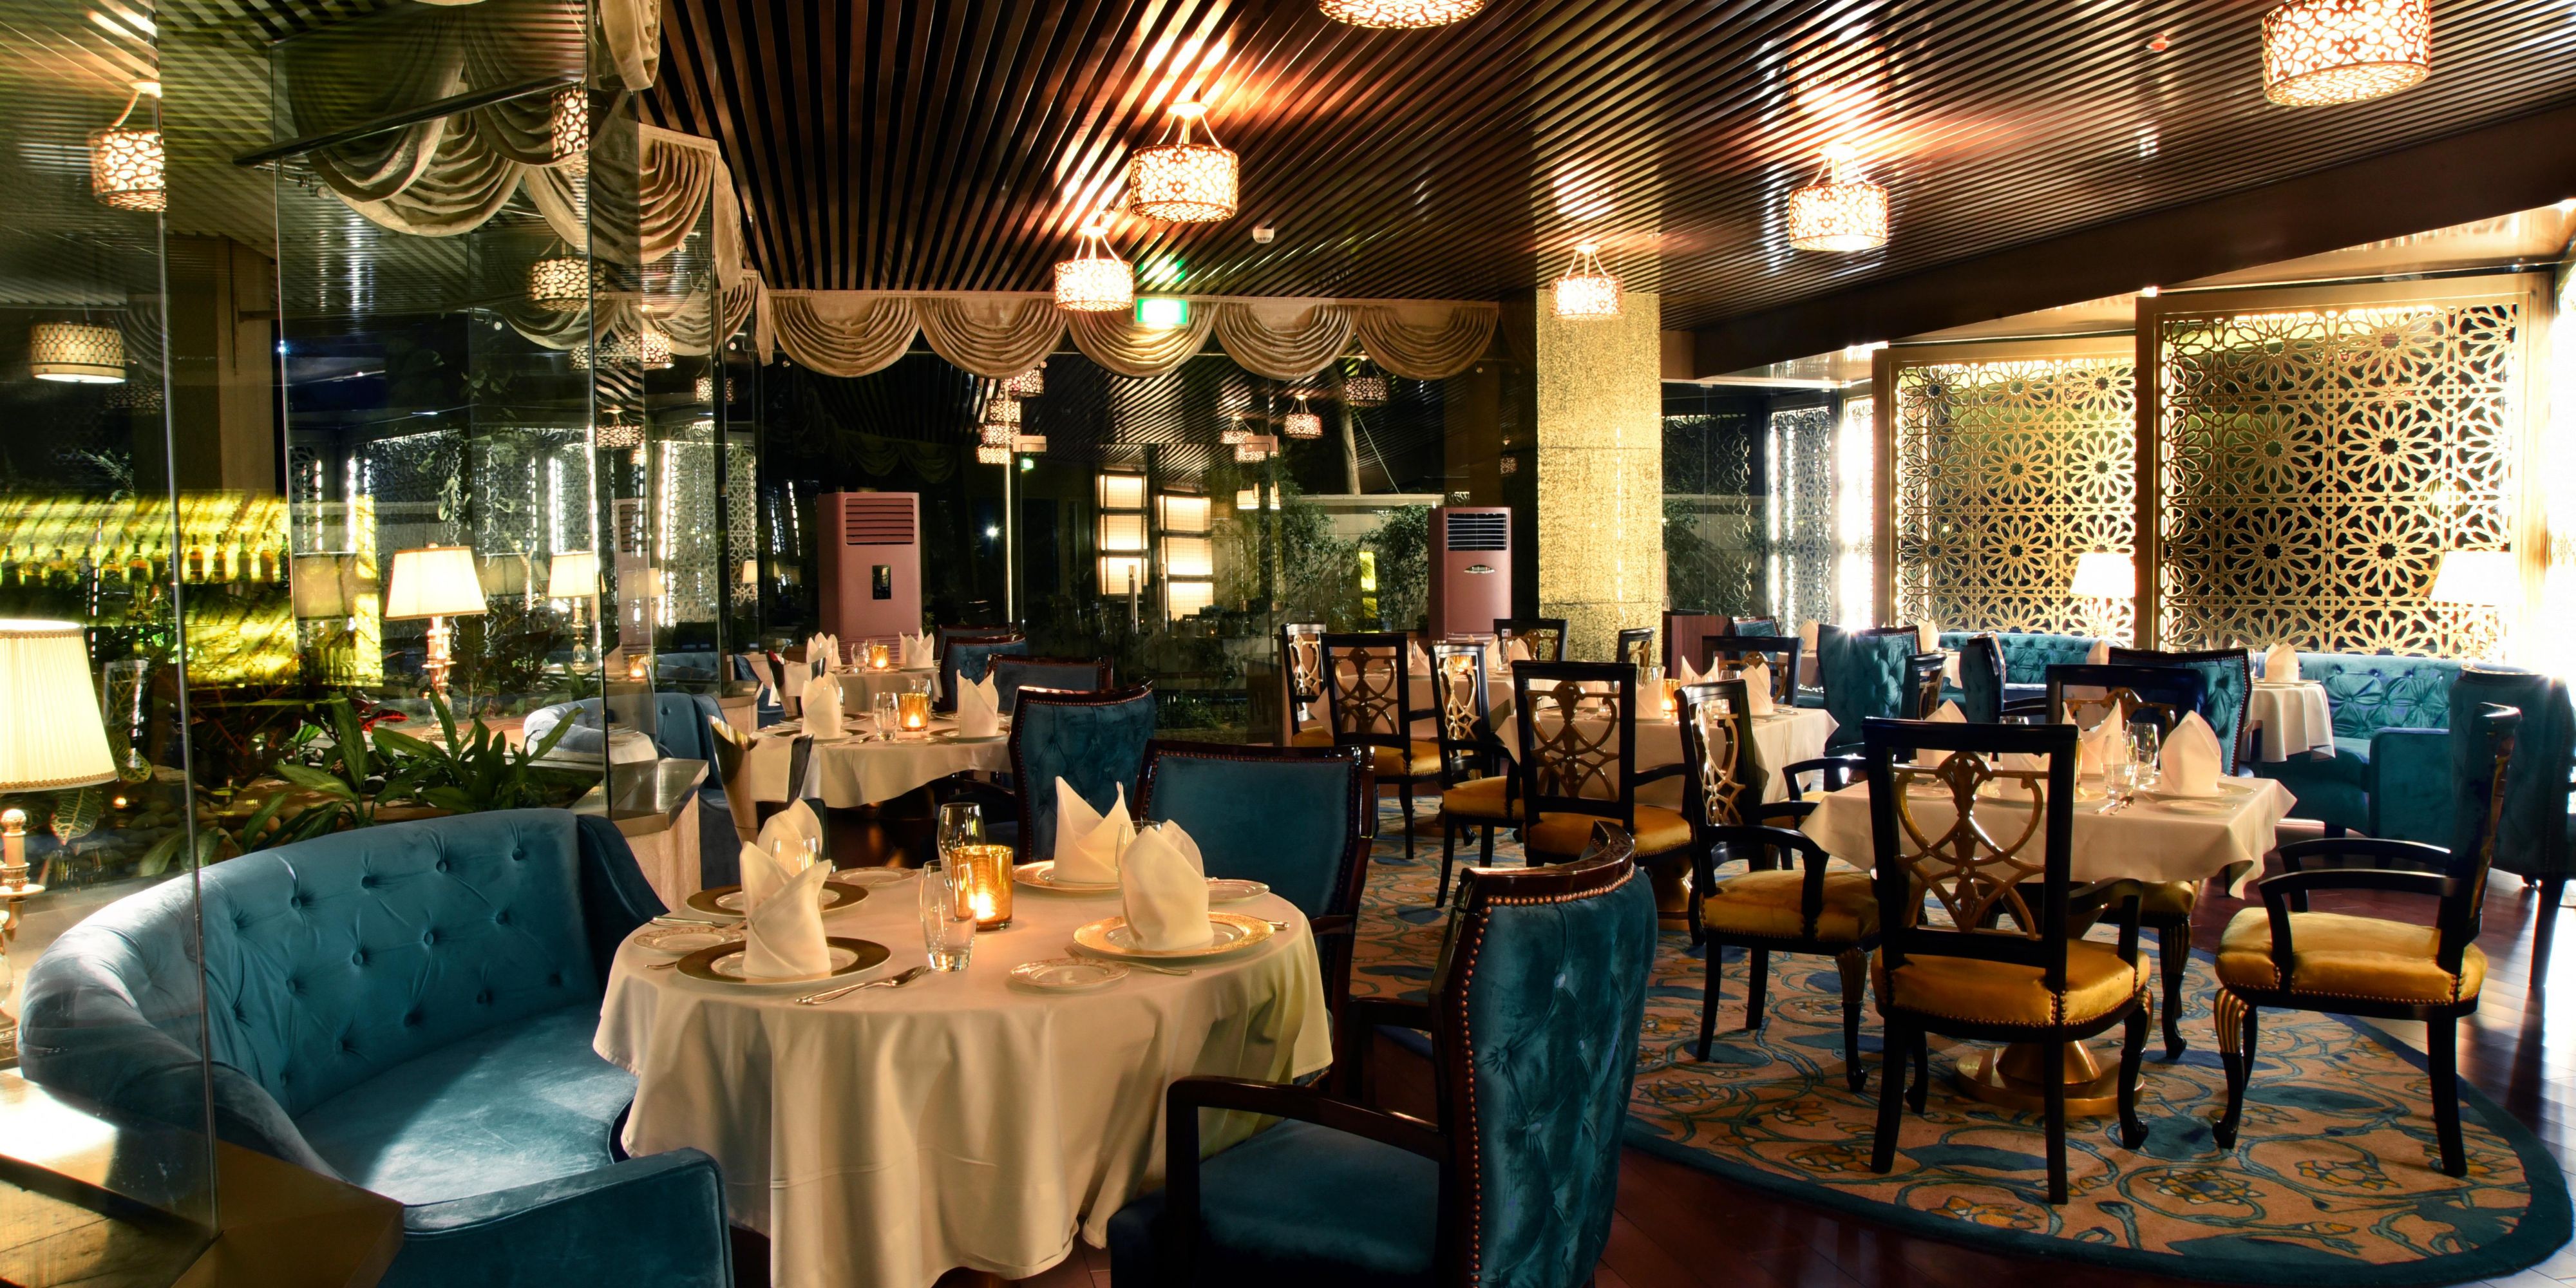 Enjoy the best pan-Asian cuisine in town at our award-winning restaurant House of Han.